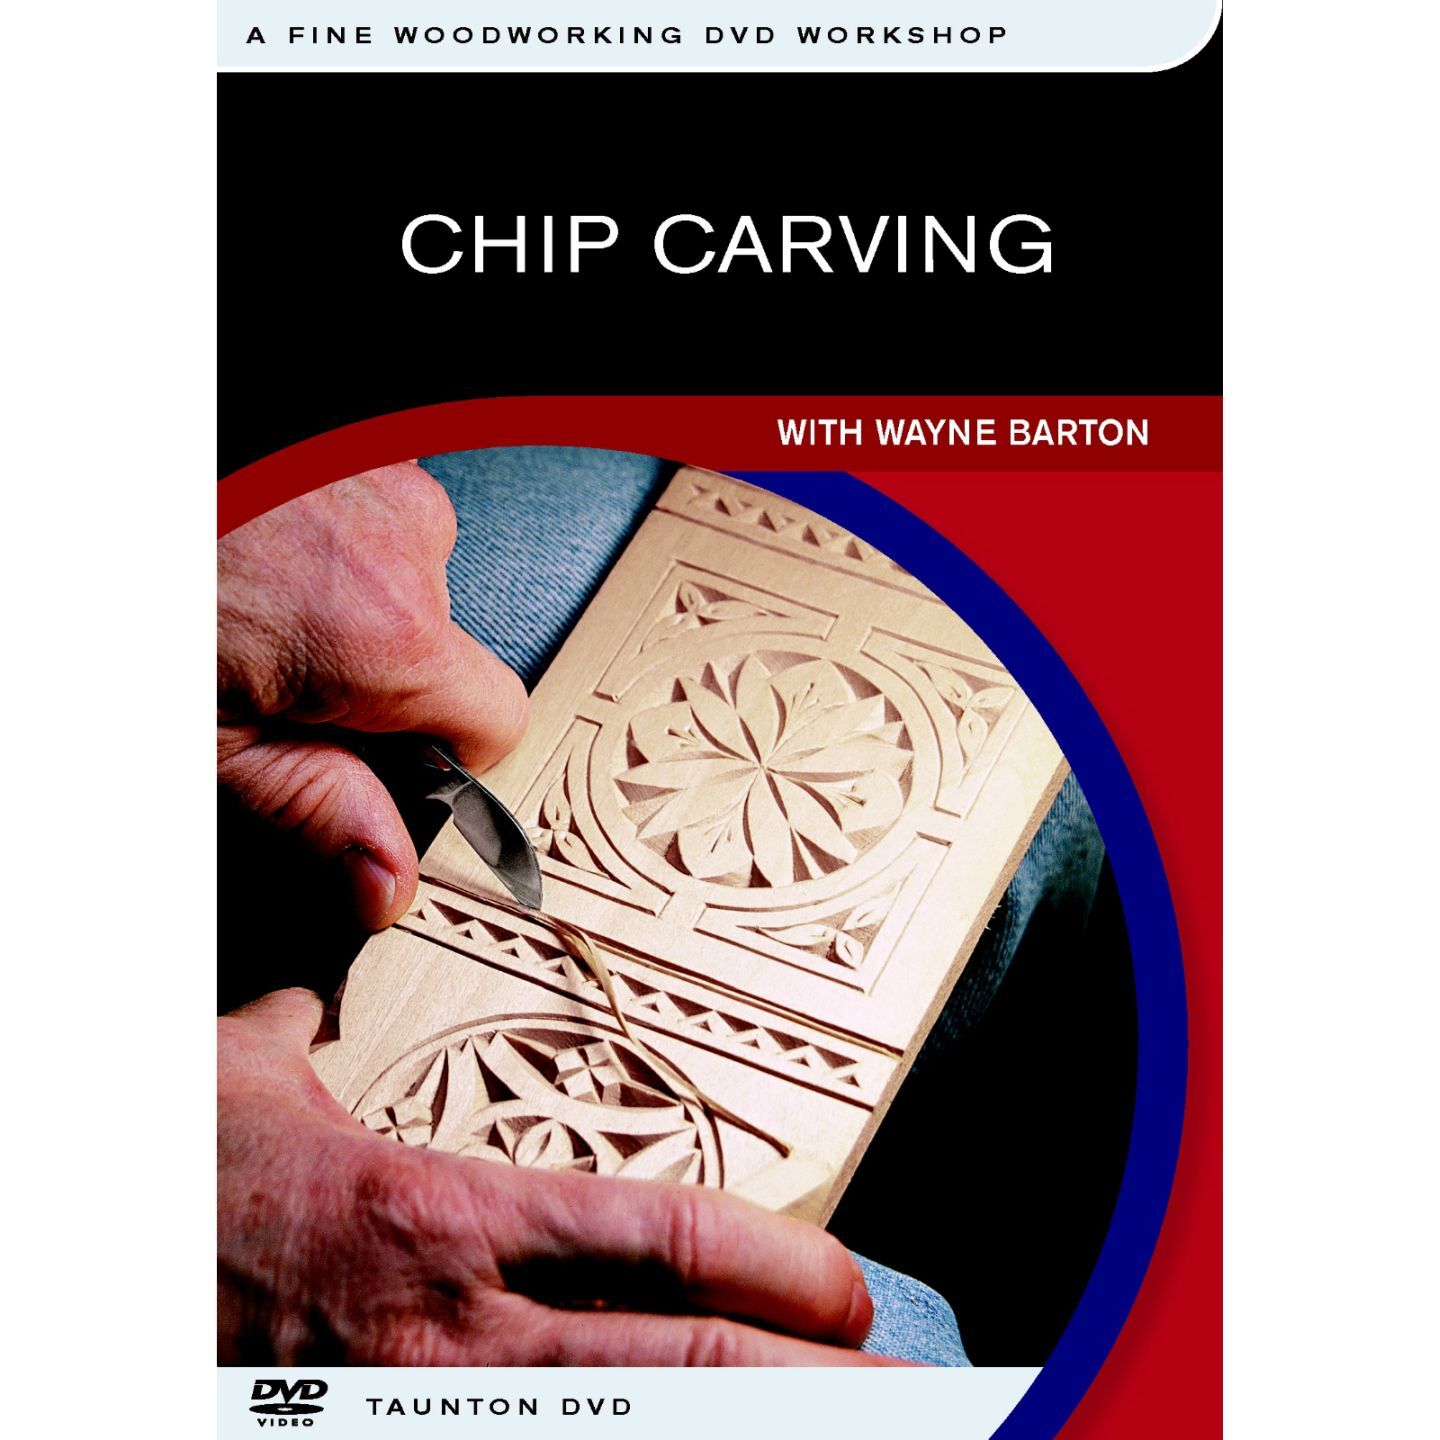 Chip Carving - DVD